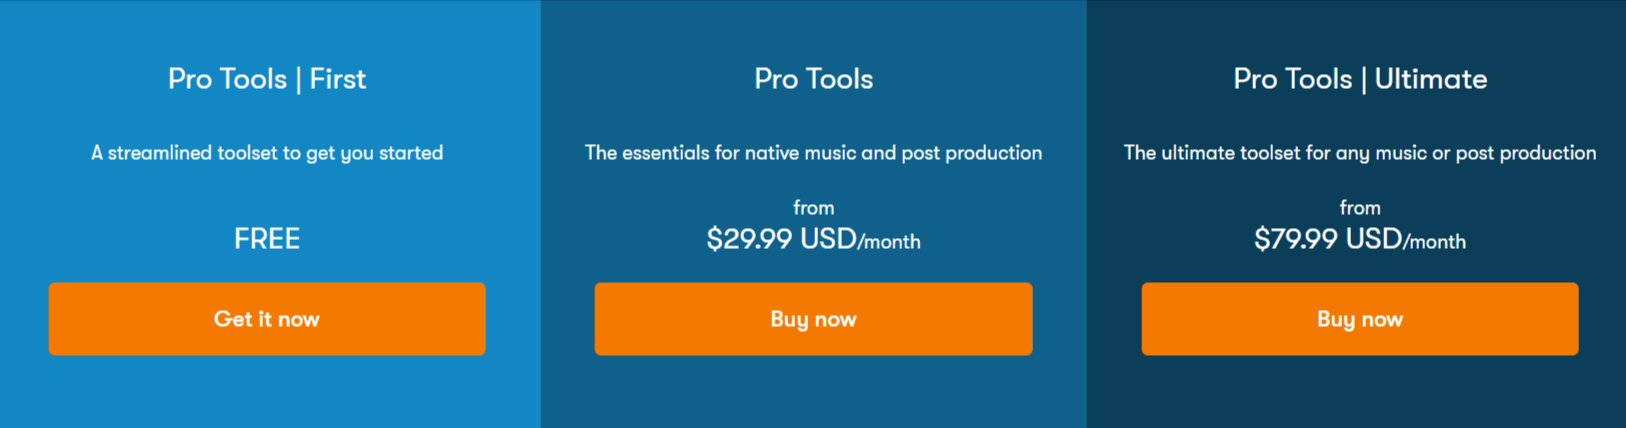 Pro Tools pricing page